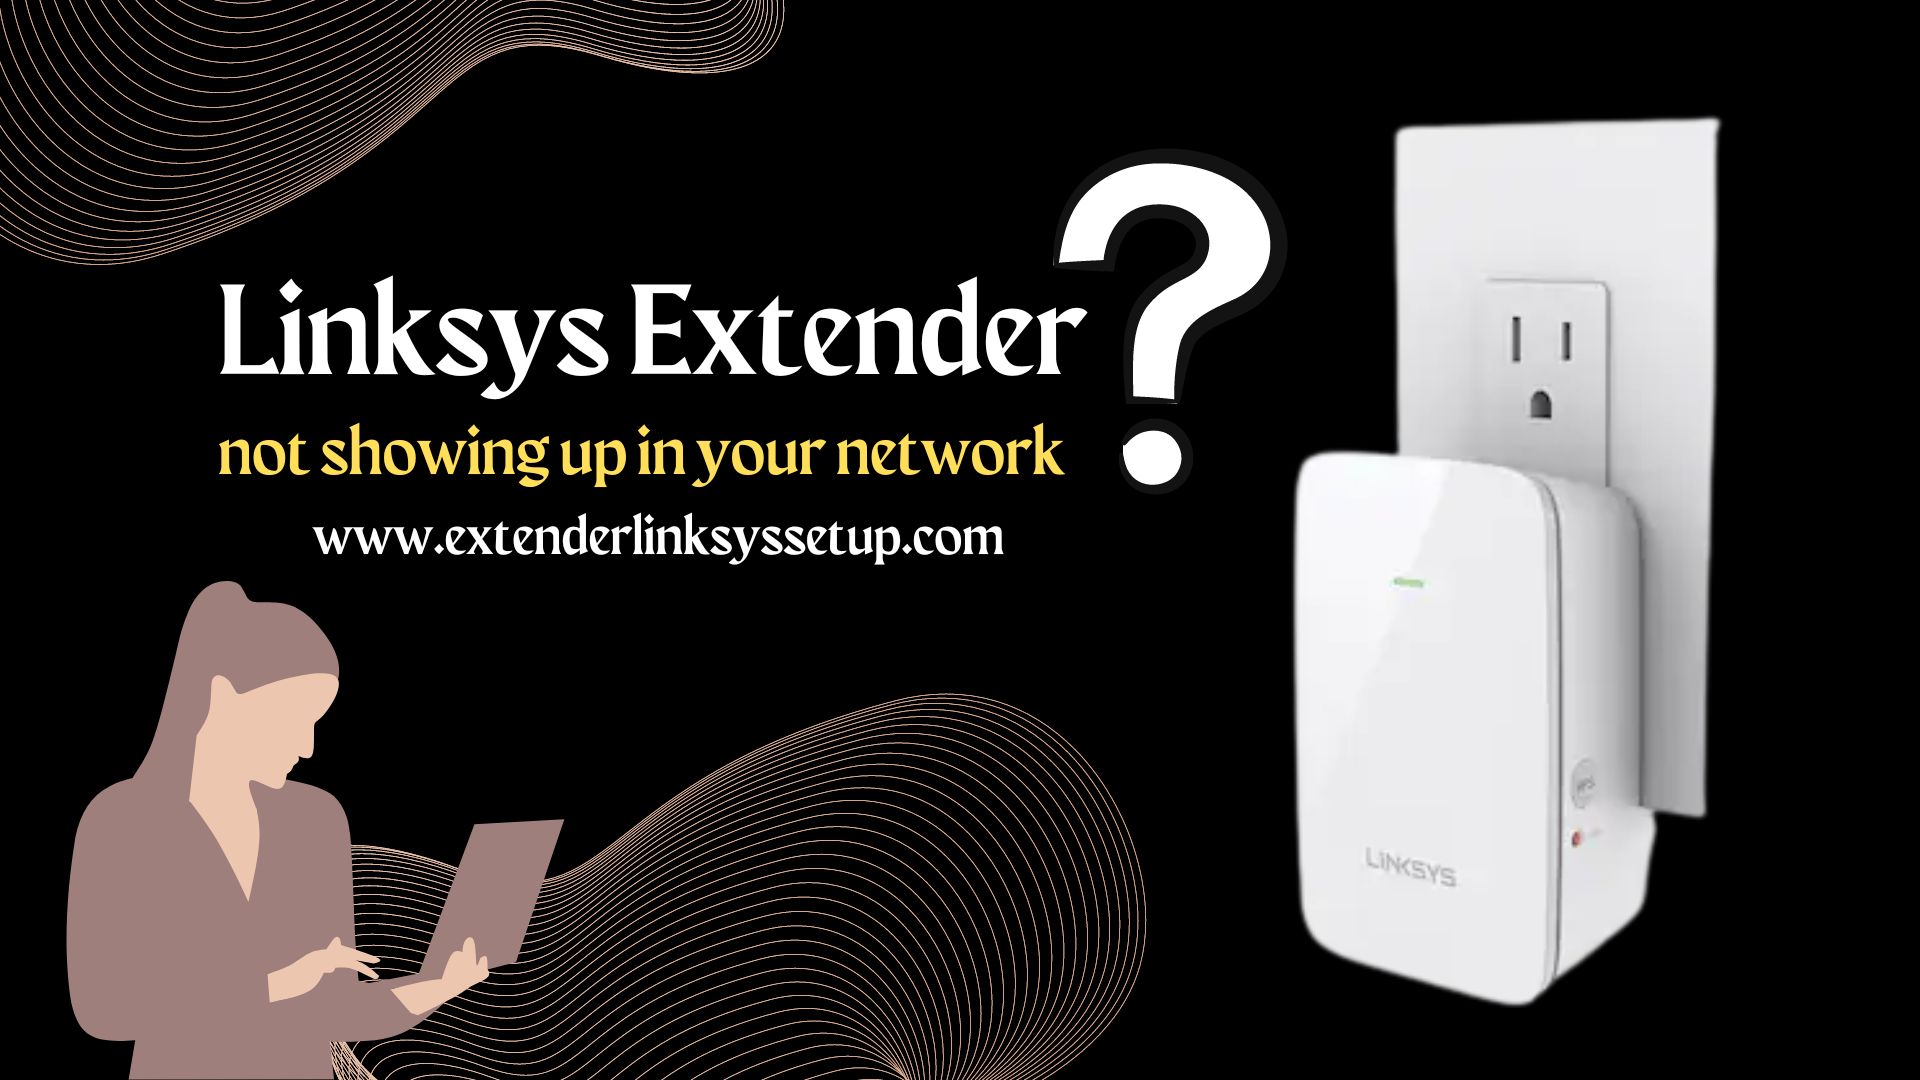 Linksys Extender not showing up in your network